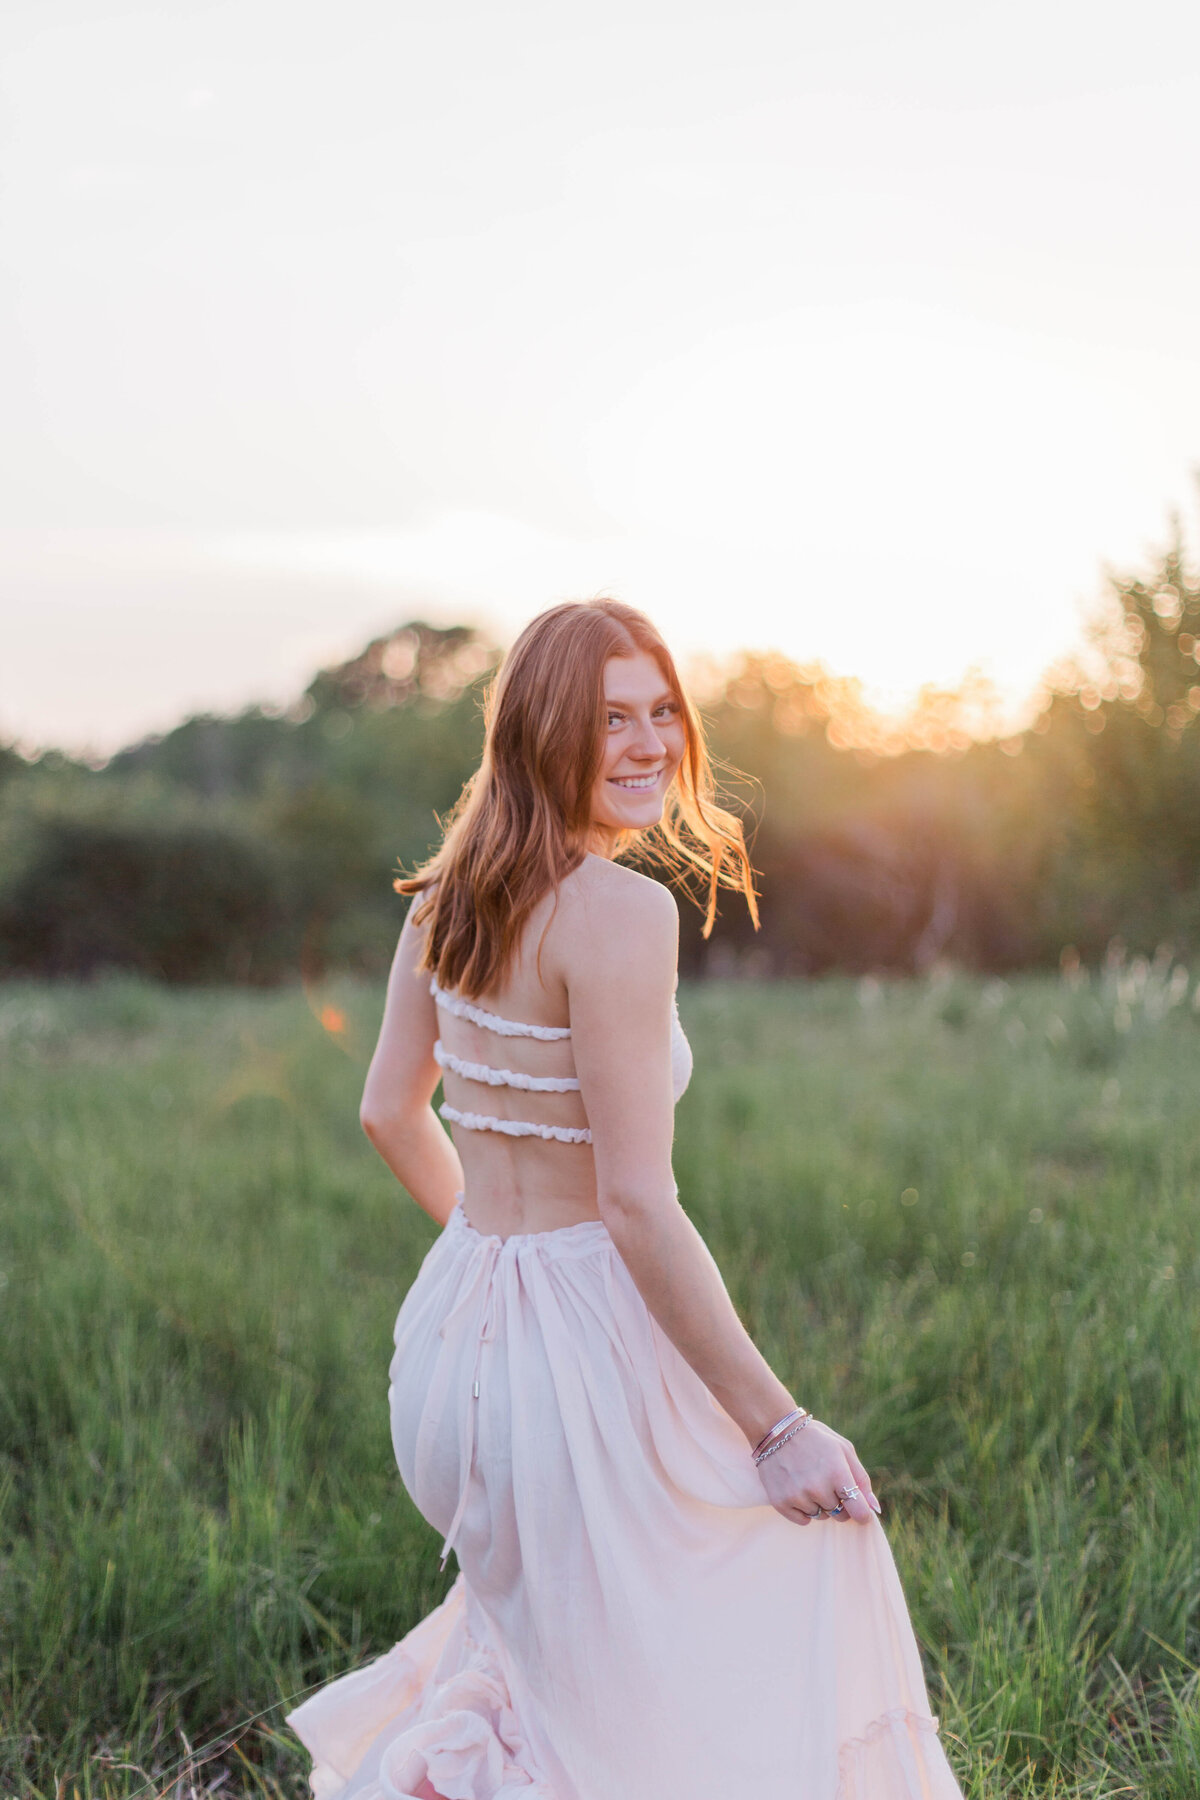 Highschool senior at sunset looks over her shoulder while the golden hour light makes her red hair glow